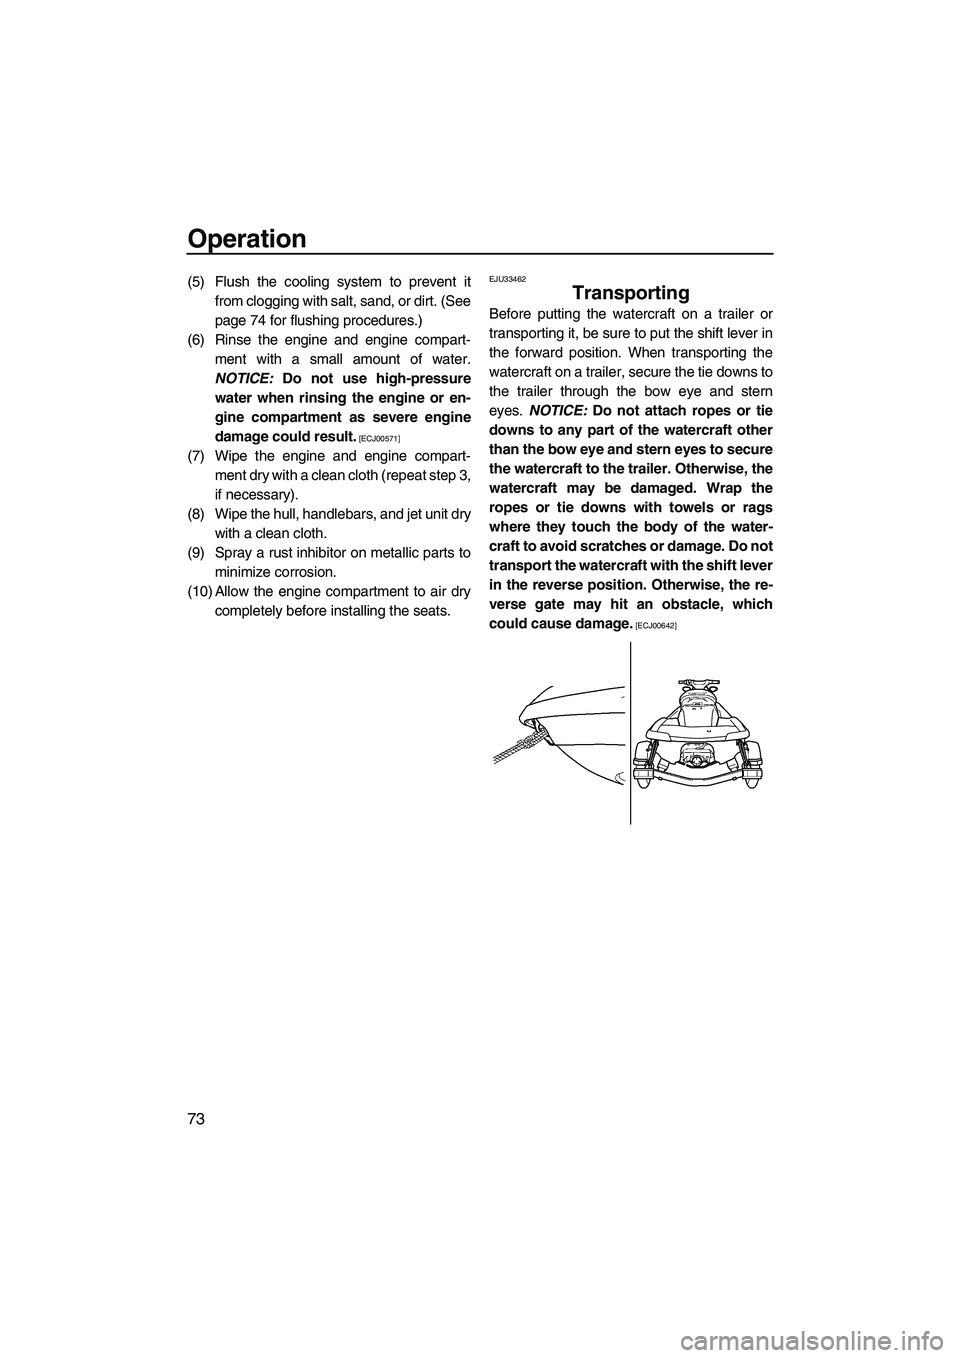 YAMAHA FX HO CRUISER 2009  Owners Manual Operation
73
(5) Flush the cooling system to prevent it
from clogging with salt, sand, or dirt. (See
page 74 for flushing procedures.)
(6) Rinse the engine and engine compart-
ment with a small amount